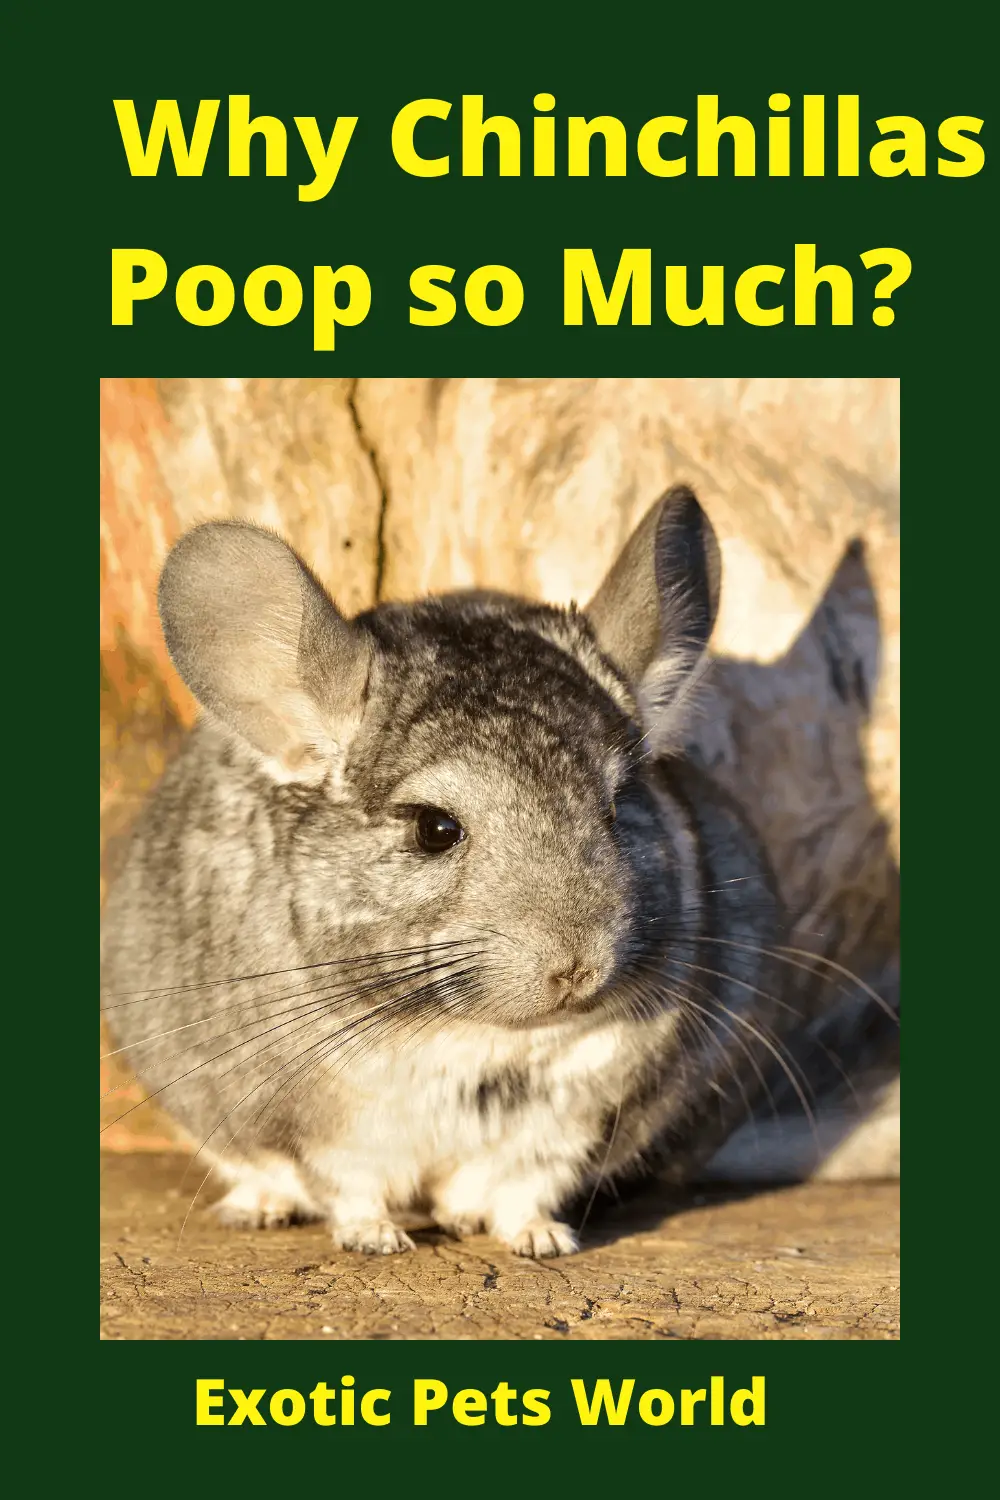 Why Chinchillas Poop so Much? – Exotic Pets World